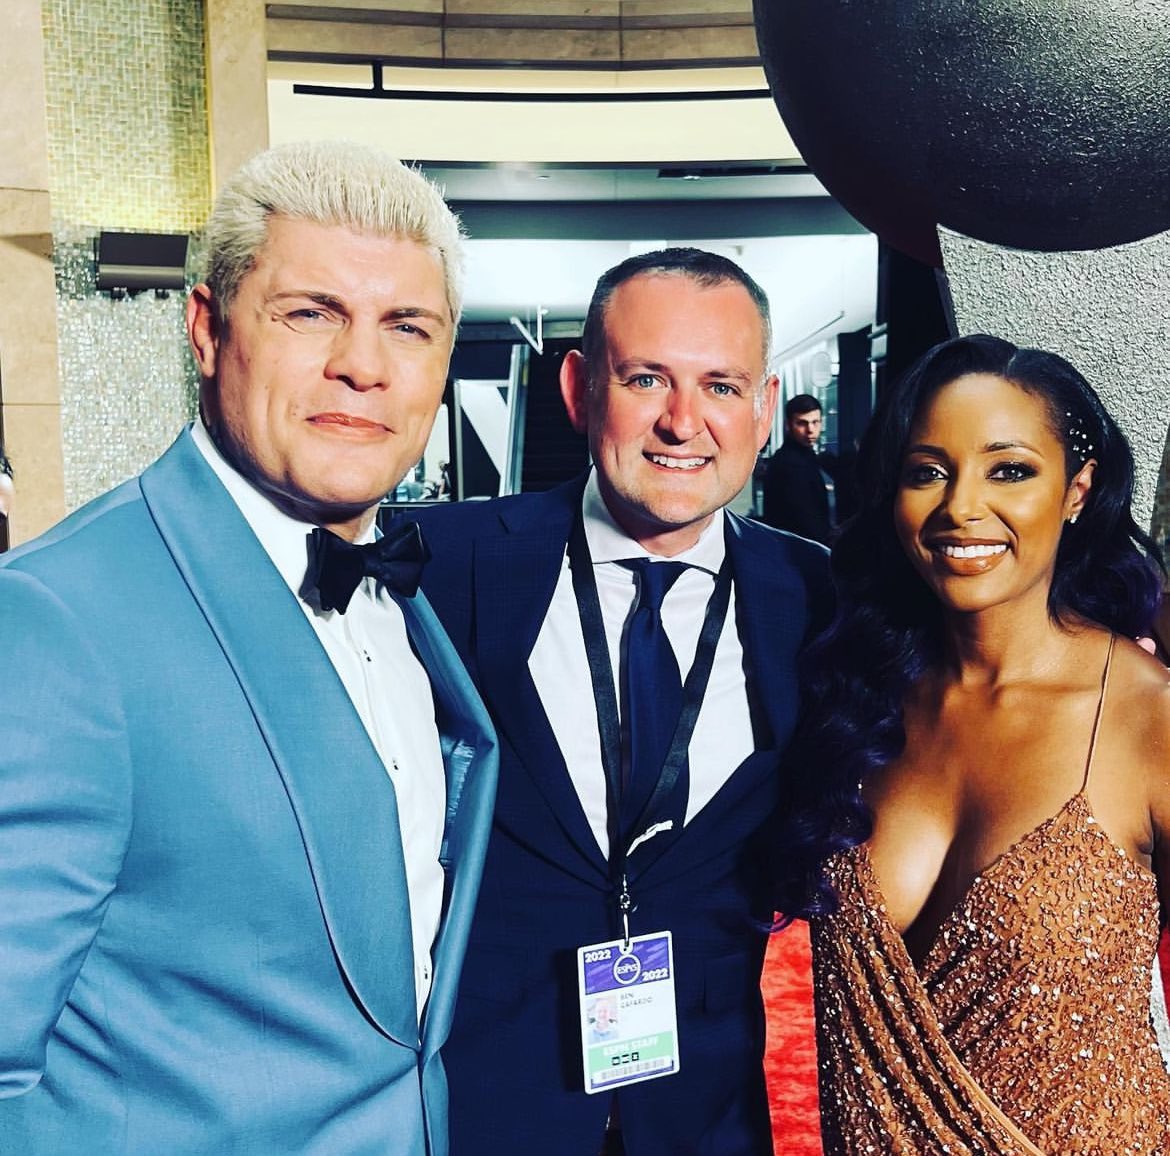 Happy @WWE @WrestleMania weekend. Best of luck to my friends at WWE and in Philly. One of the biggest wrestling events of all time. Throwback to the @ESPYS 2022 with WrestleMania main eventer @CodyRhodes and the brilliant and influential @TheBrandiRhodes